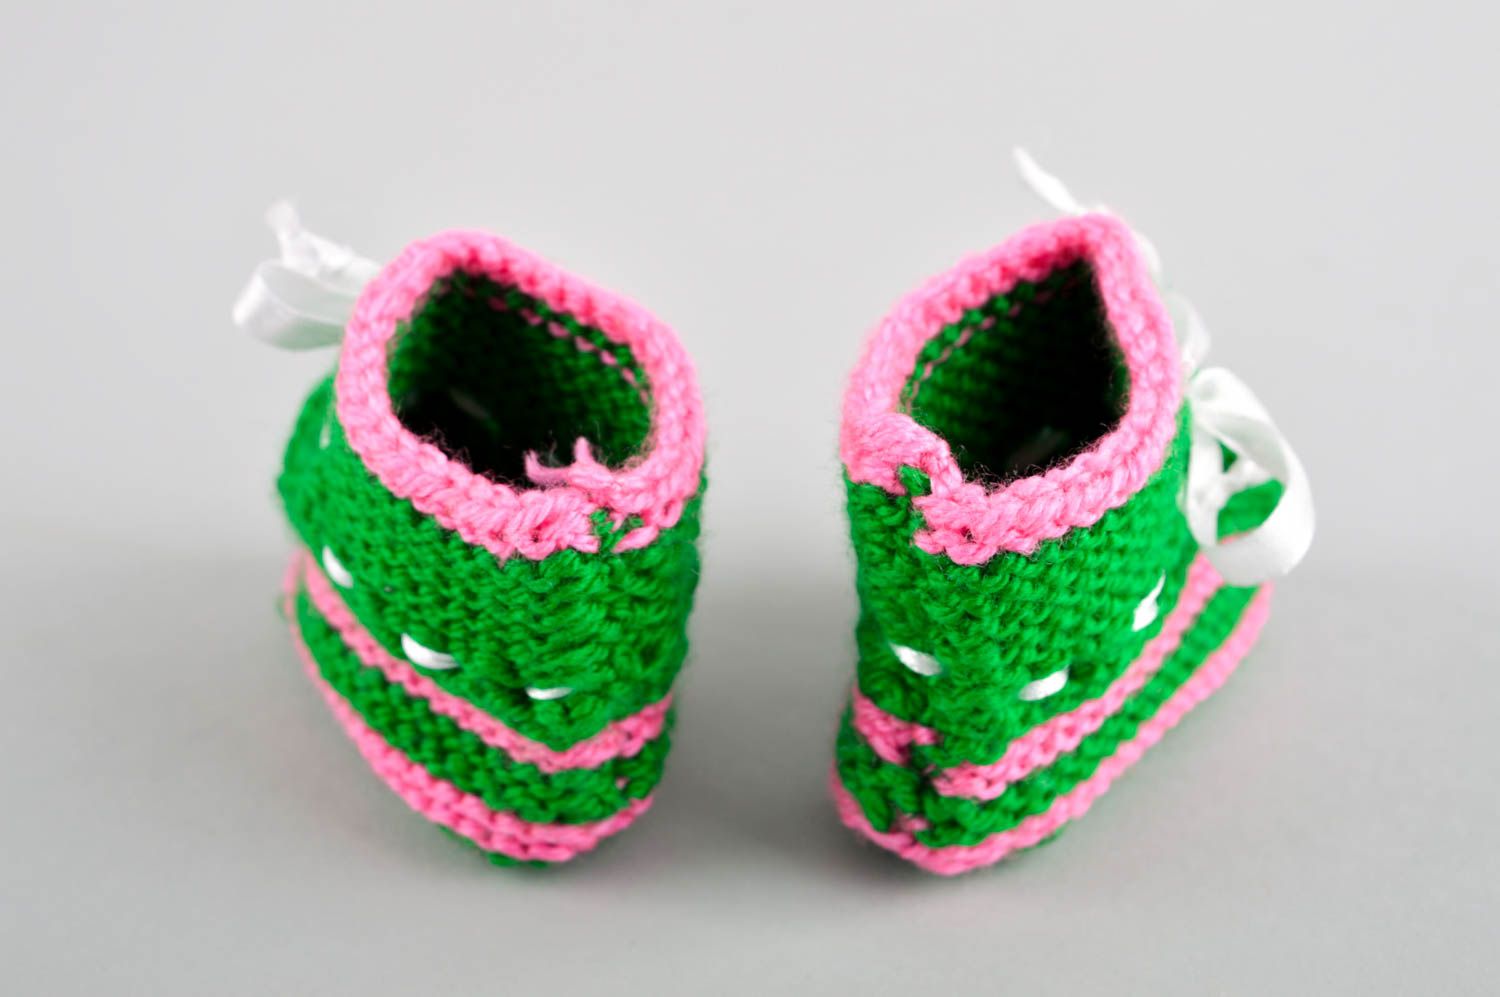 Handmade baby shoes crochet baby shoes baby socks goods for children kids gifts photo 5